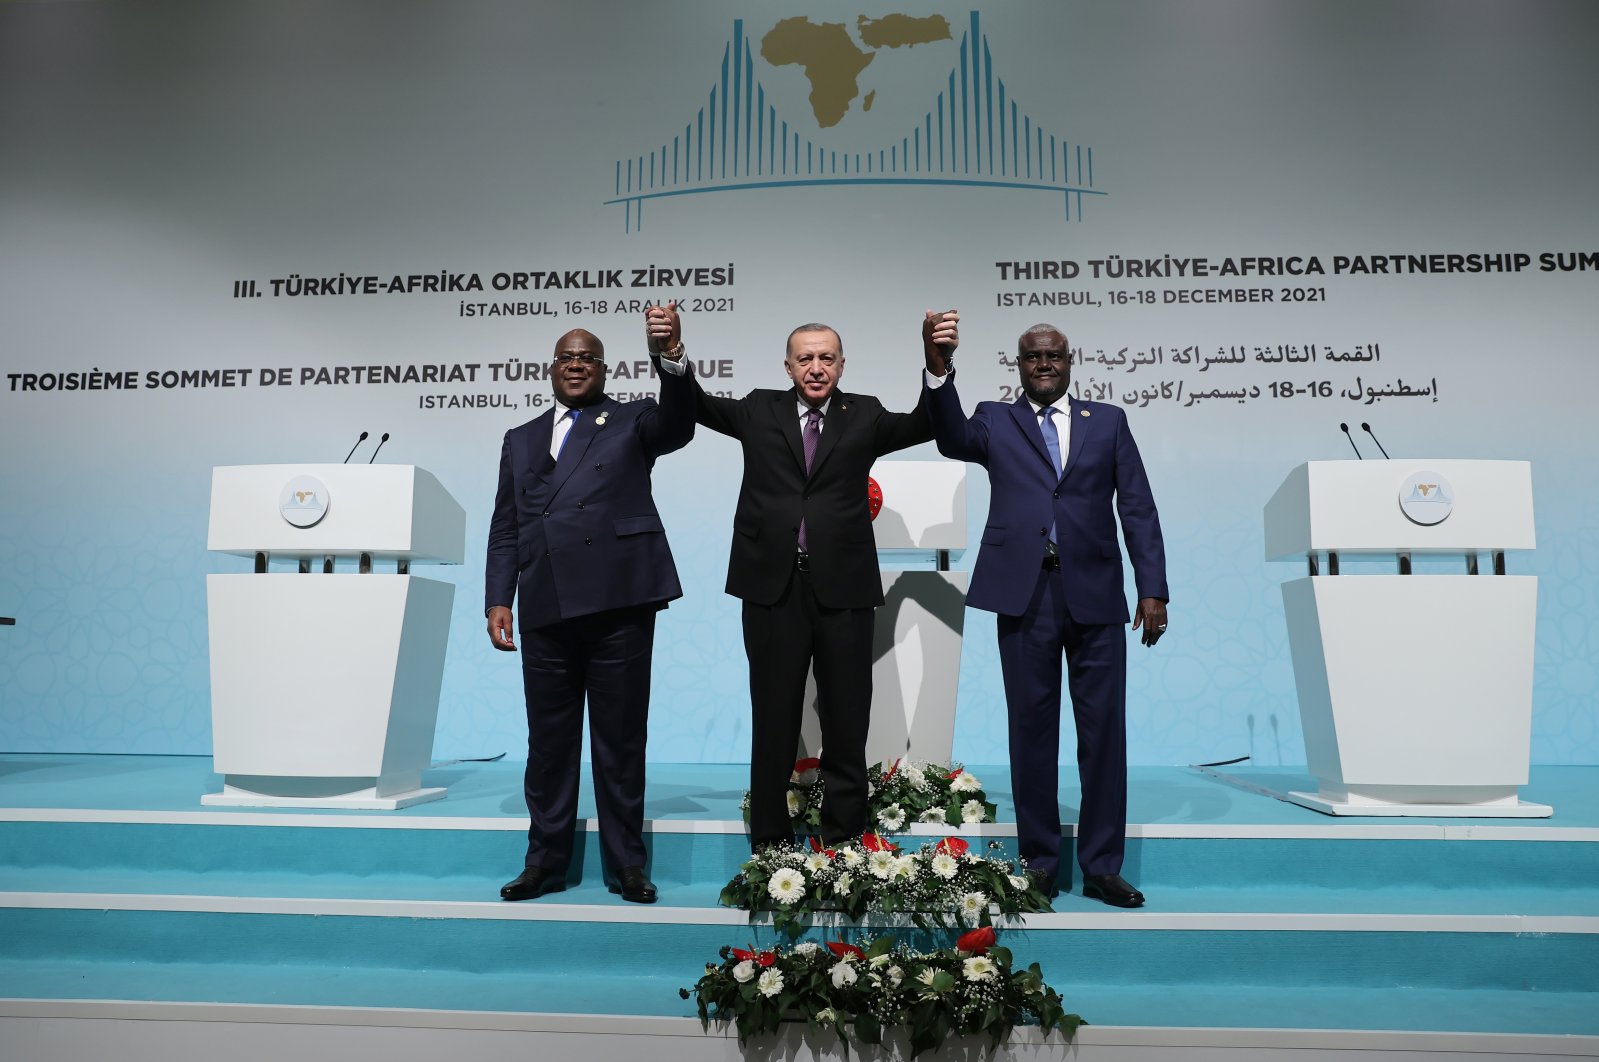 President Recep Tayyip Erdoğan (C), his Republic of Democratic Congo counterpart Felix Tshisekedi (L) and the Chairperson of the African Union Commission, Moussa Faki Mahamat pose for a picture after the press conference during the the third Turkey-Africa Partnership Summit in Istanbul on Dec. 19, 2021 (AA Photo)